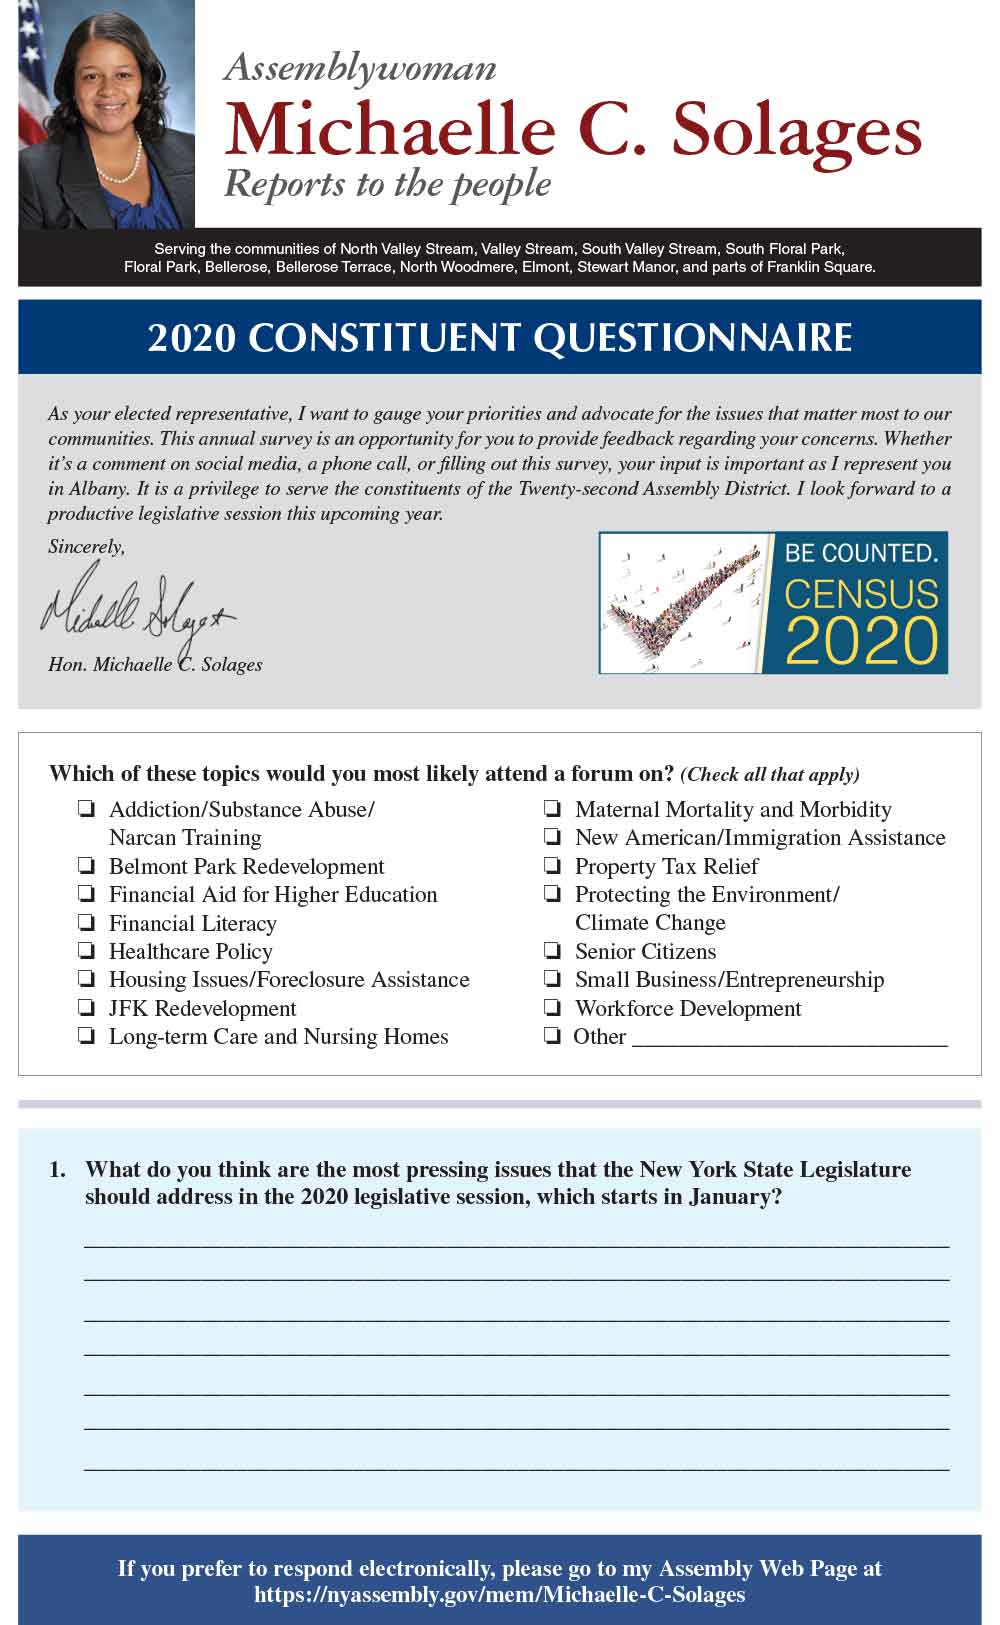 Assemblywoman Michaelle C. Solages Reports to the People - 2020 Constituent Questionnaire